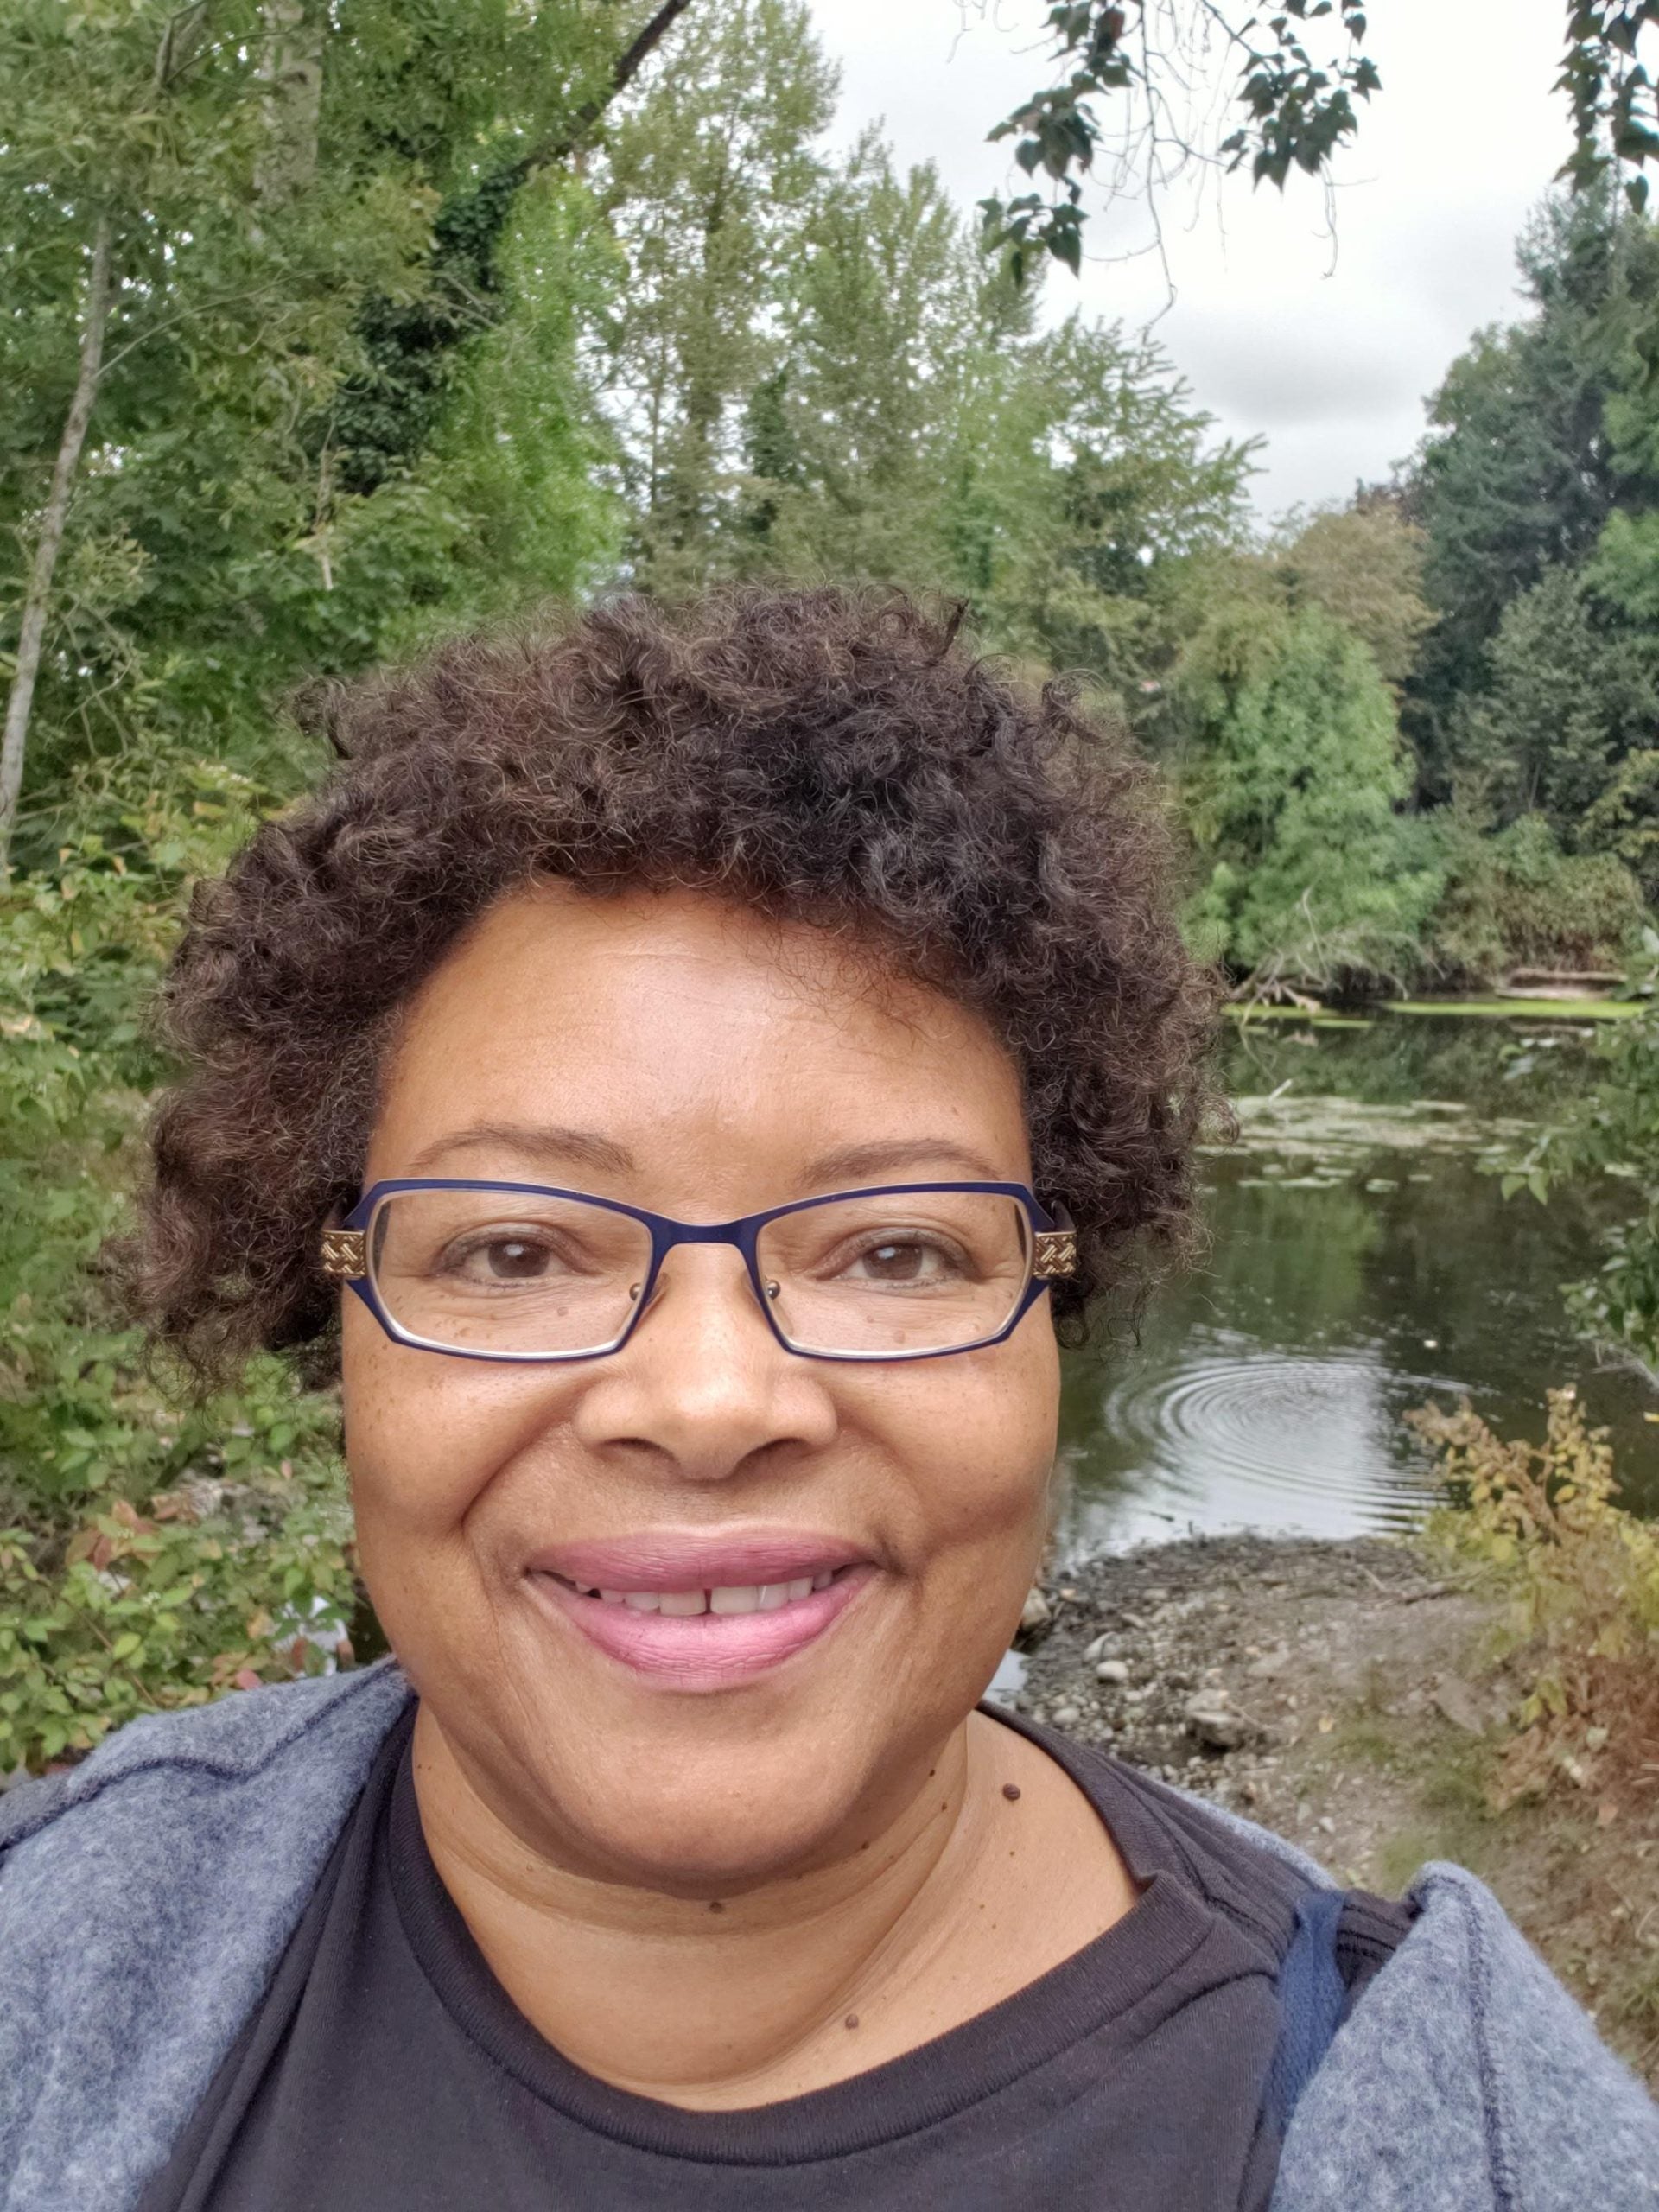 After Experiencing Racism On Portland's Trails, This Woman Started The City's BIPOC Hiking Group